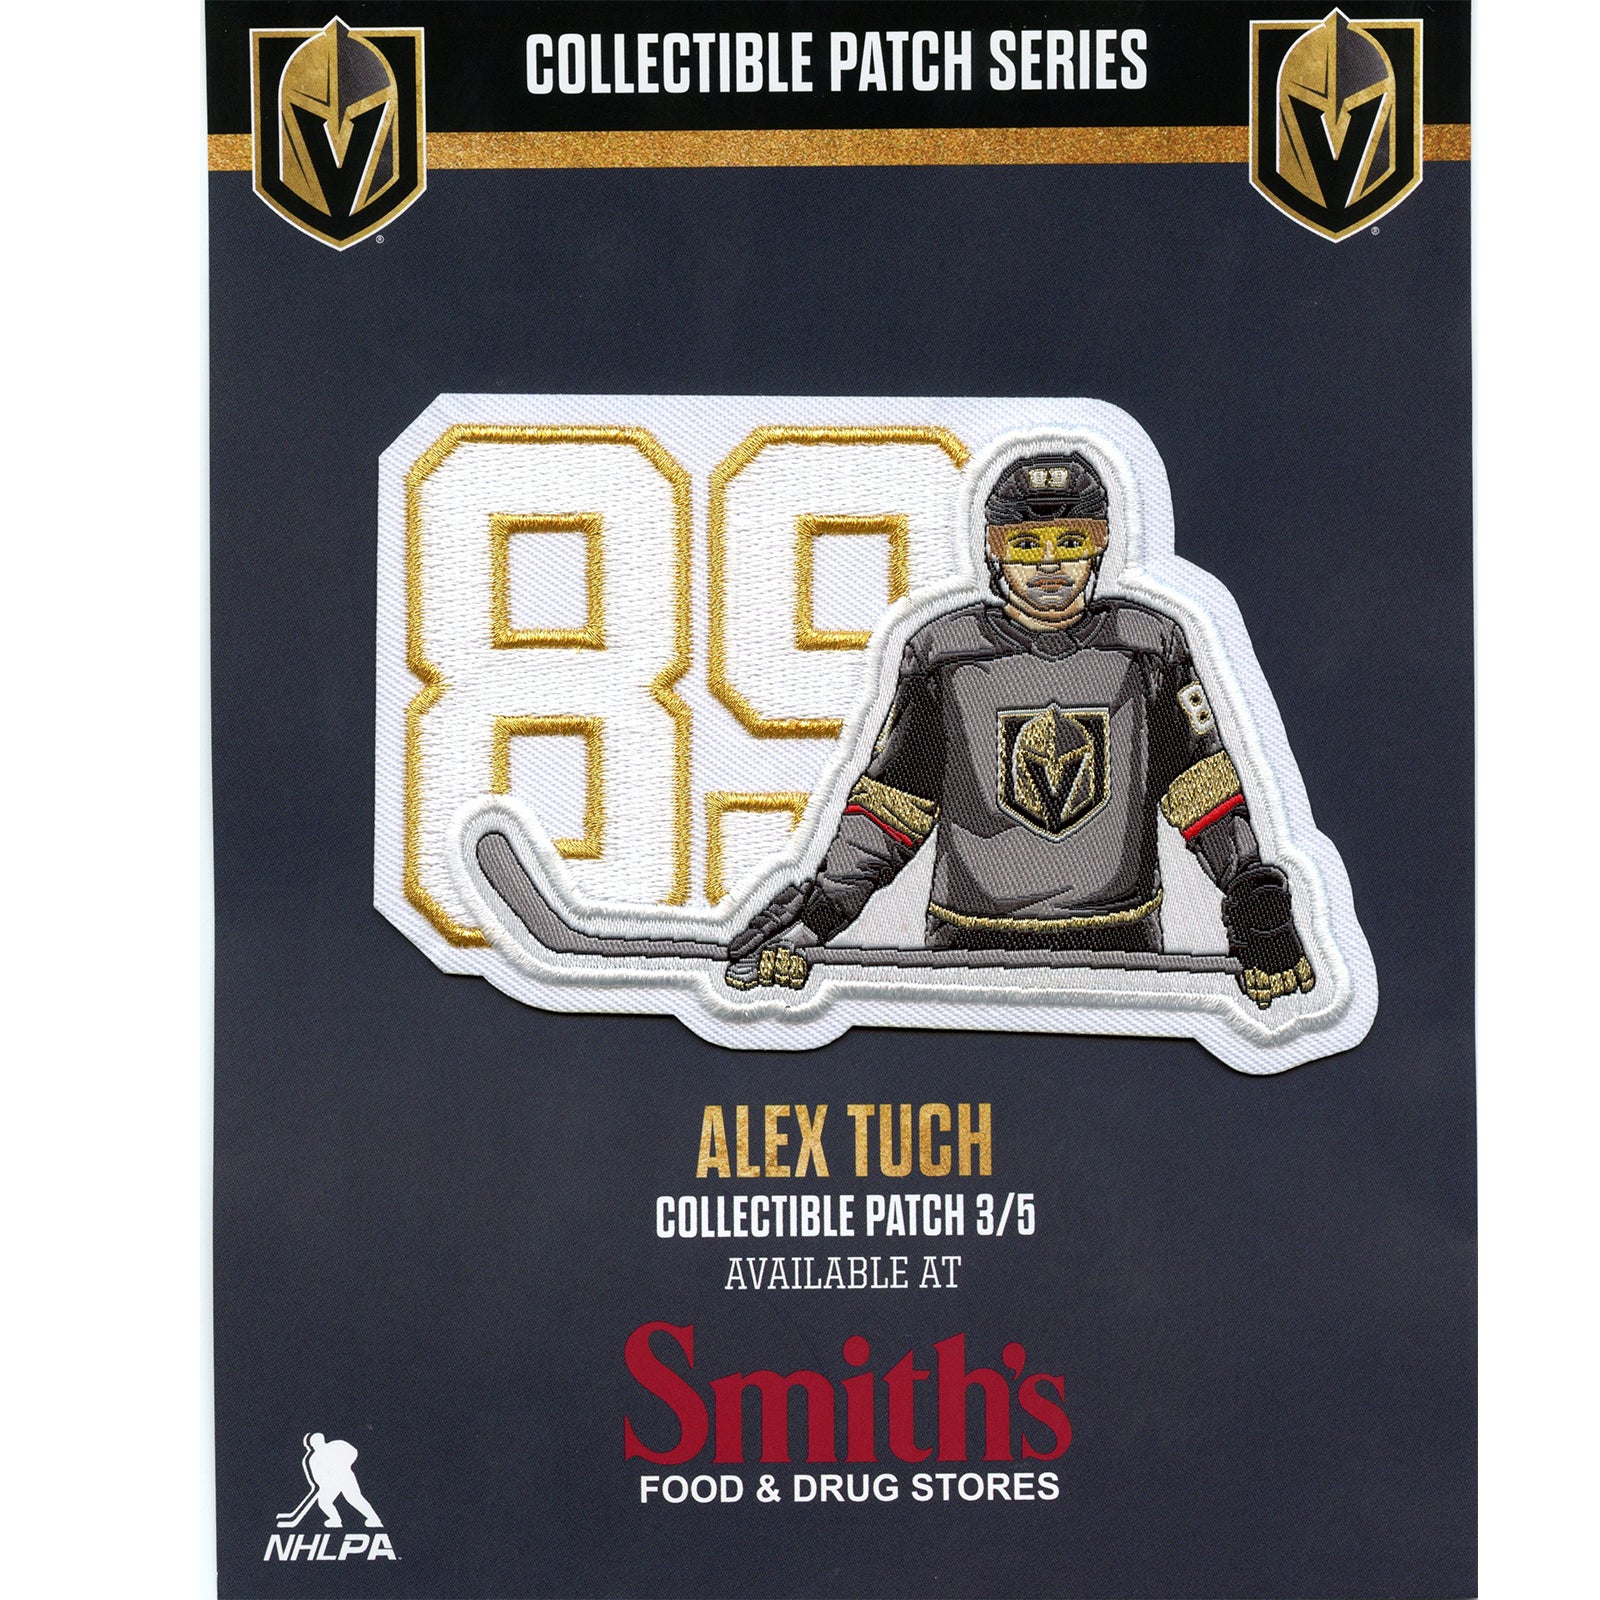 Las Vegas Golden Knights Alex Tuch #89 NHL Patch 1 of 5 (2nd Series) 